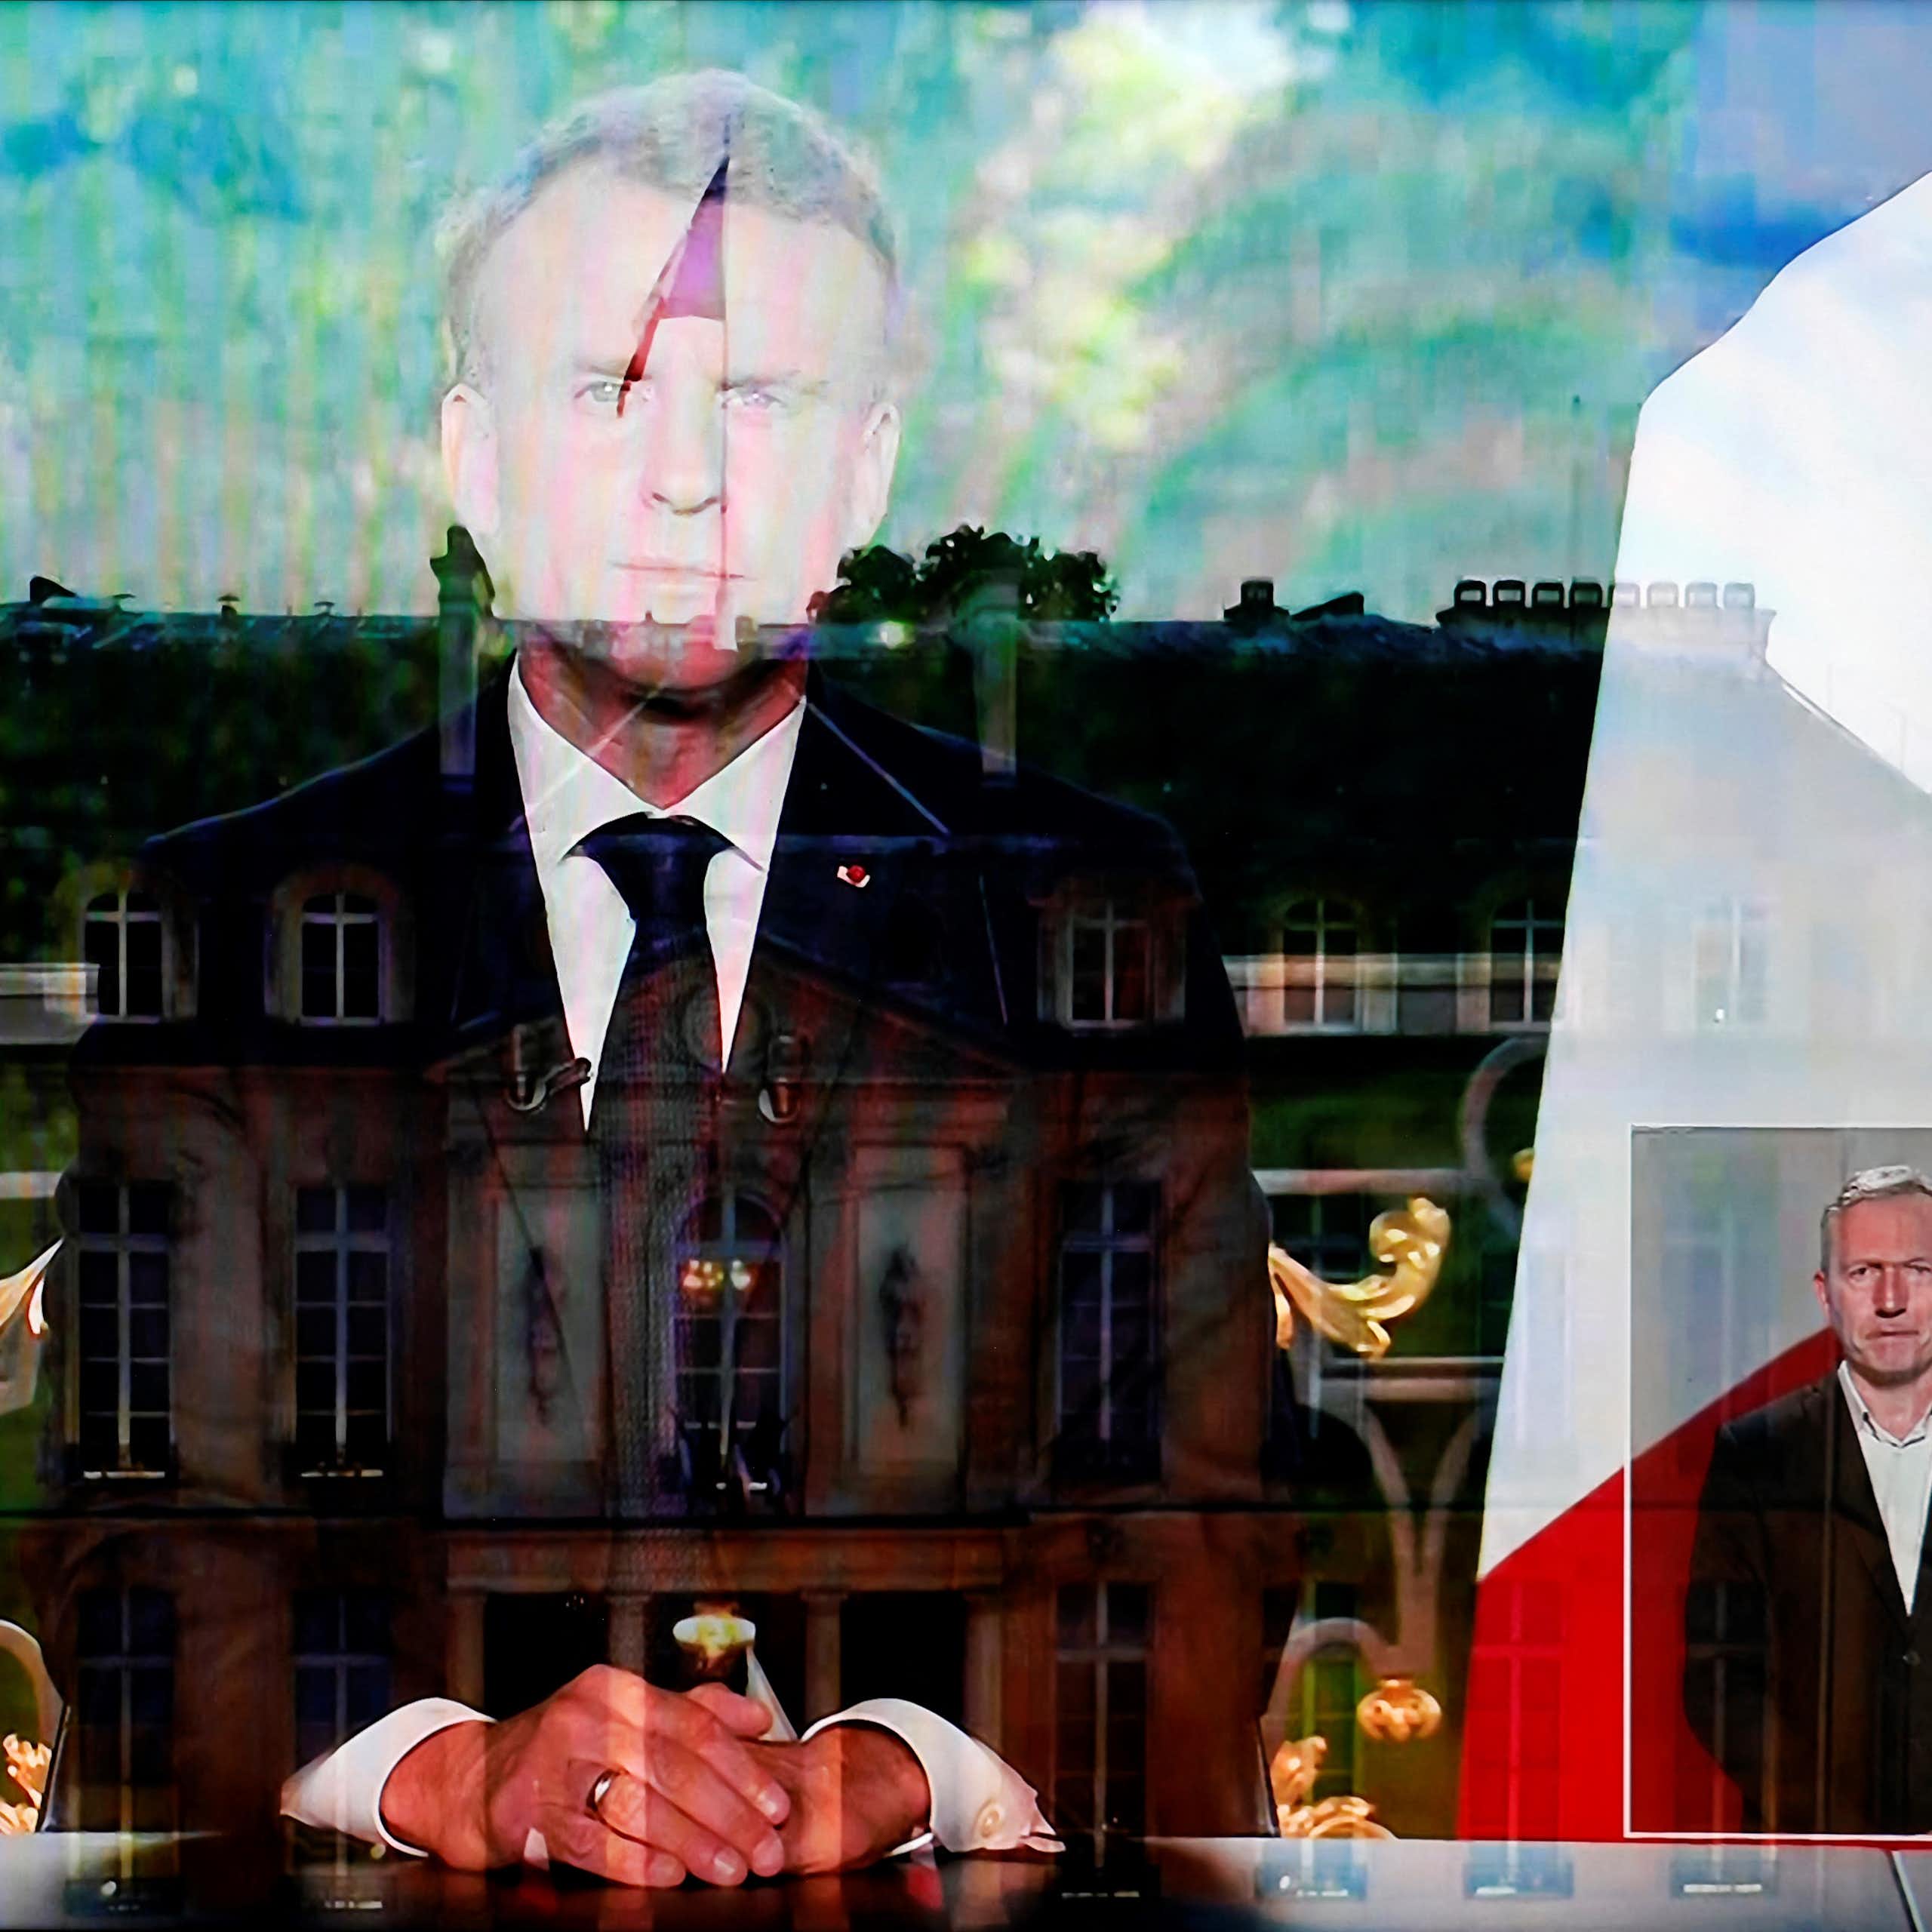 Snap elections in France: a political scientist lays out what’s at stake